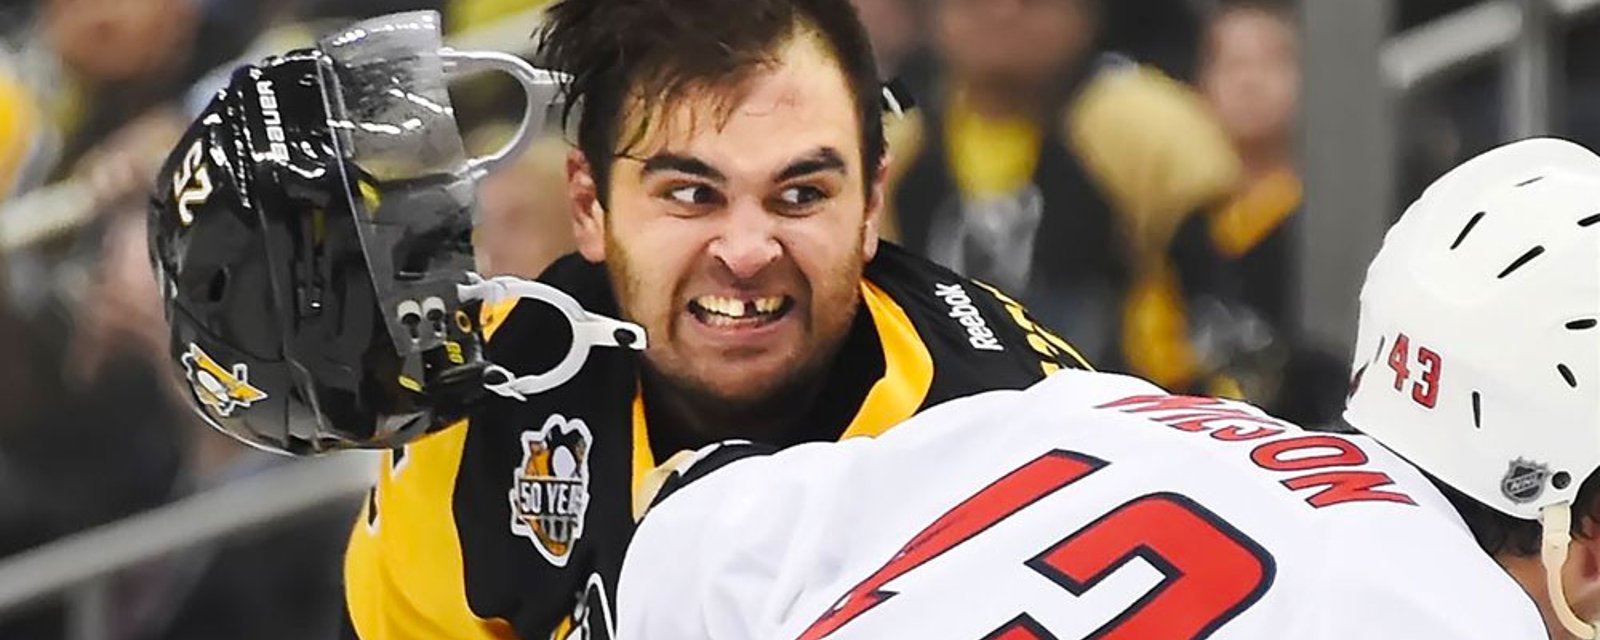 Retired enforcer Sestito claims he was given “an insane amount” of prescription drugs in NHL